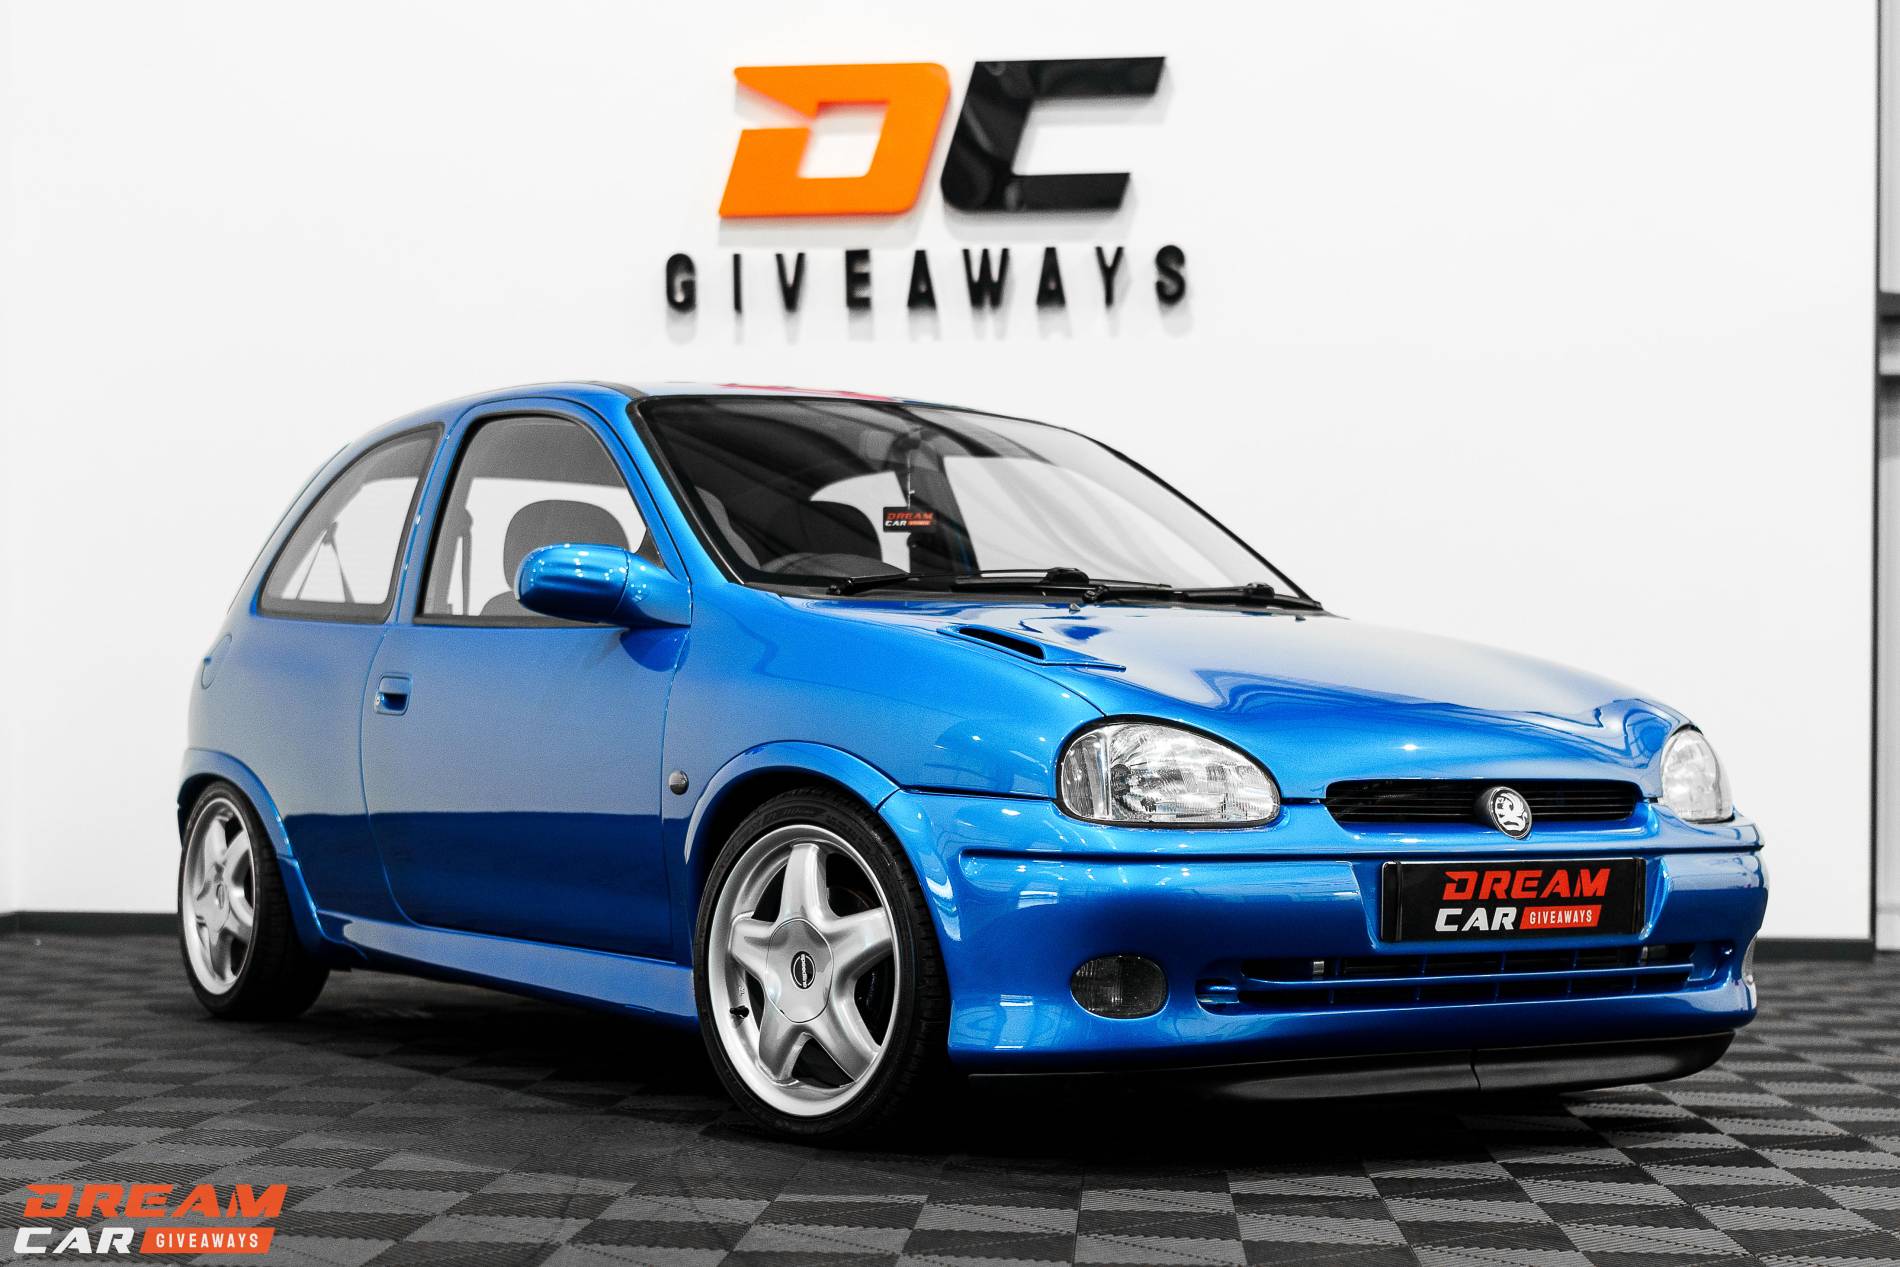 Win this Corsa Sport C20LET - Only 899 Entries